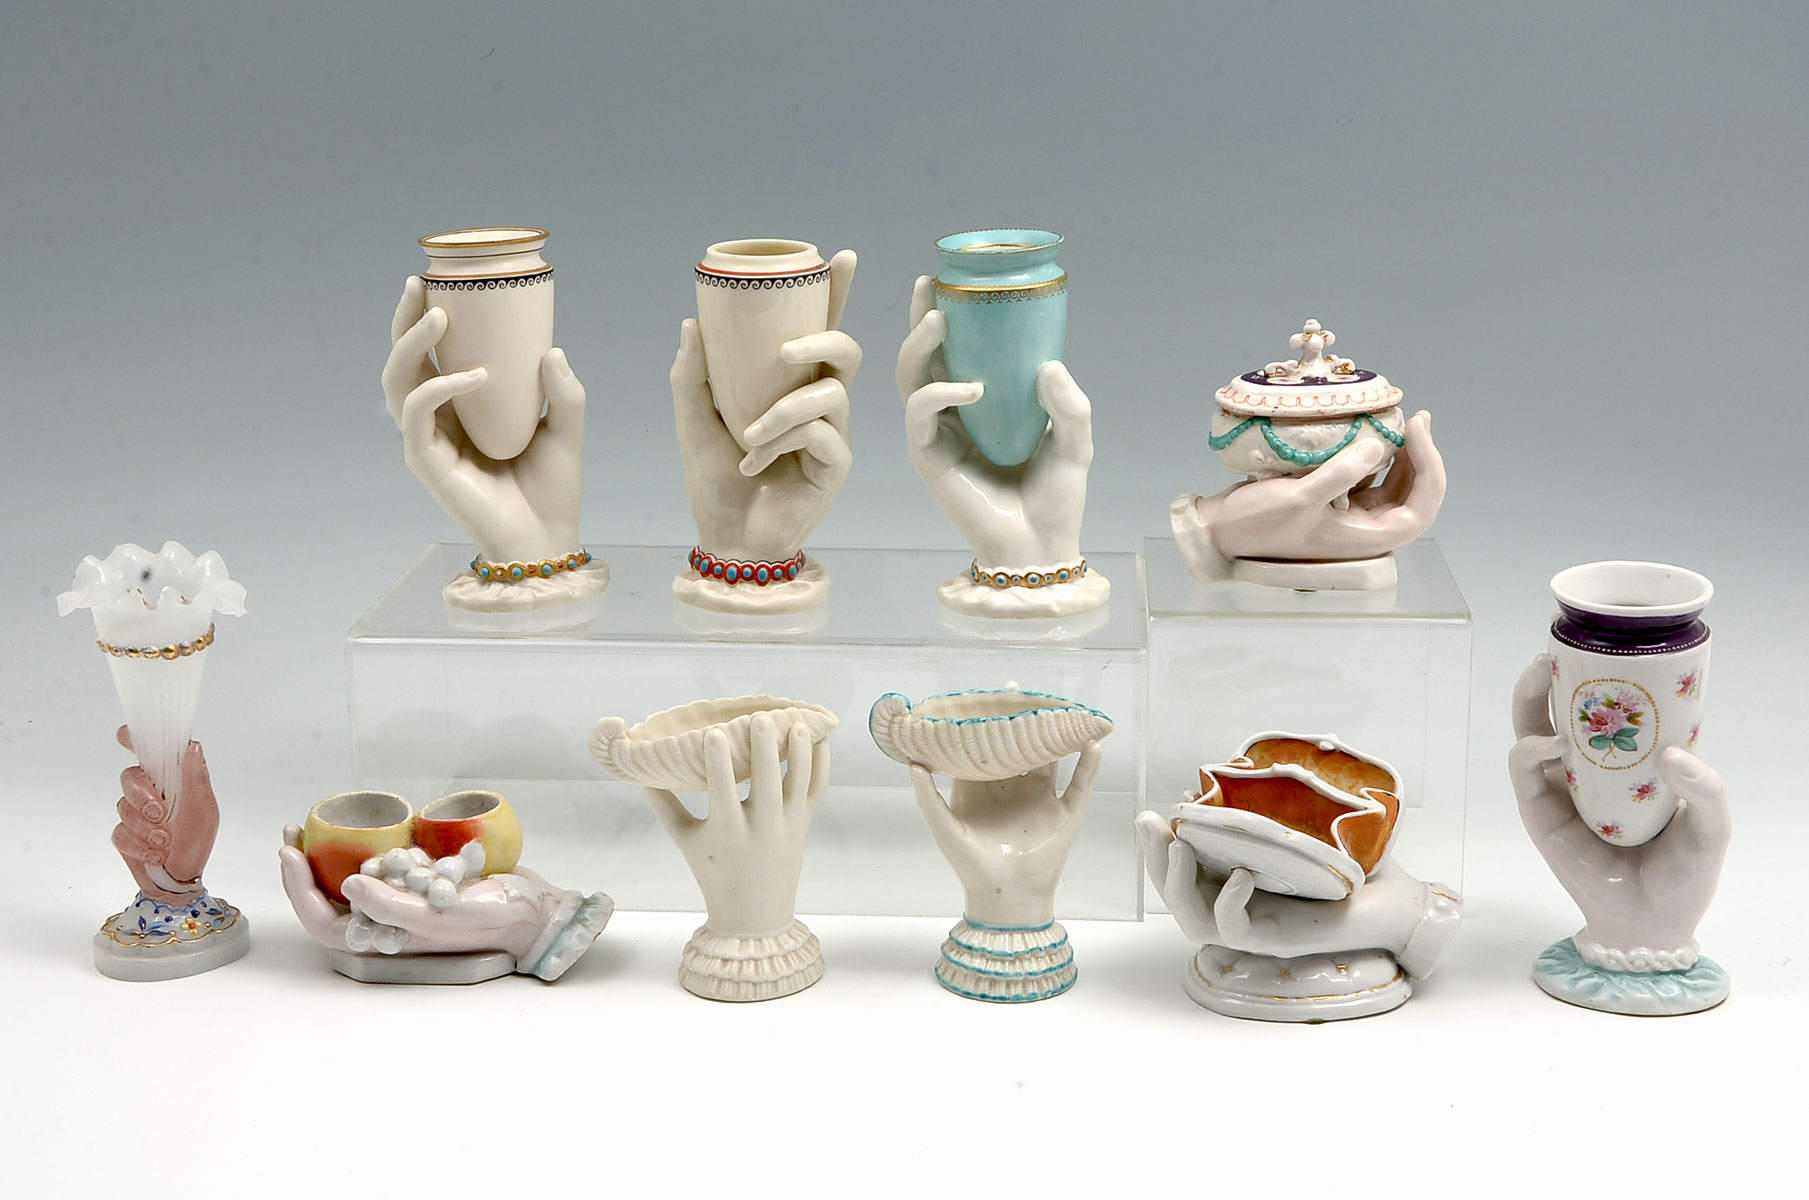 10 PIECE HAND VASE COLLECTION WITH 36eb05